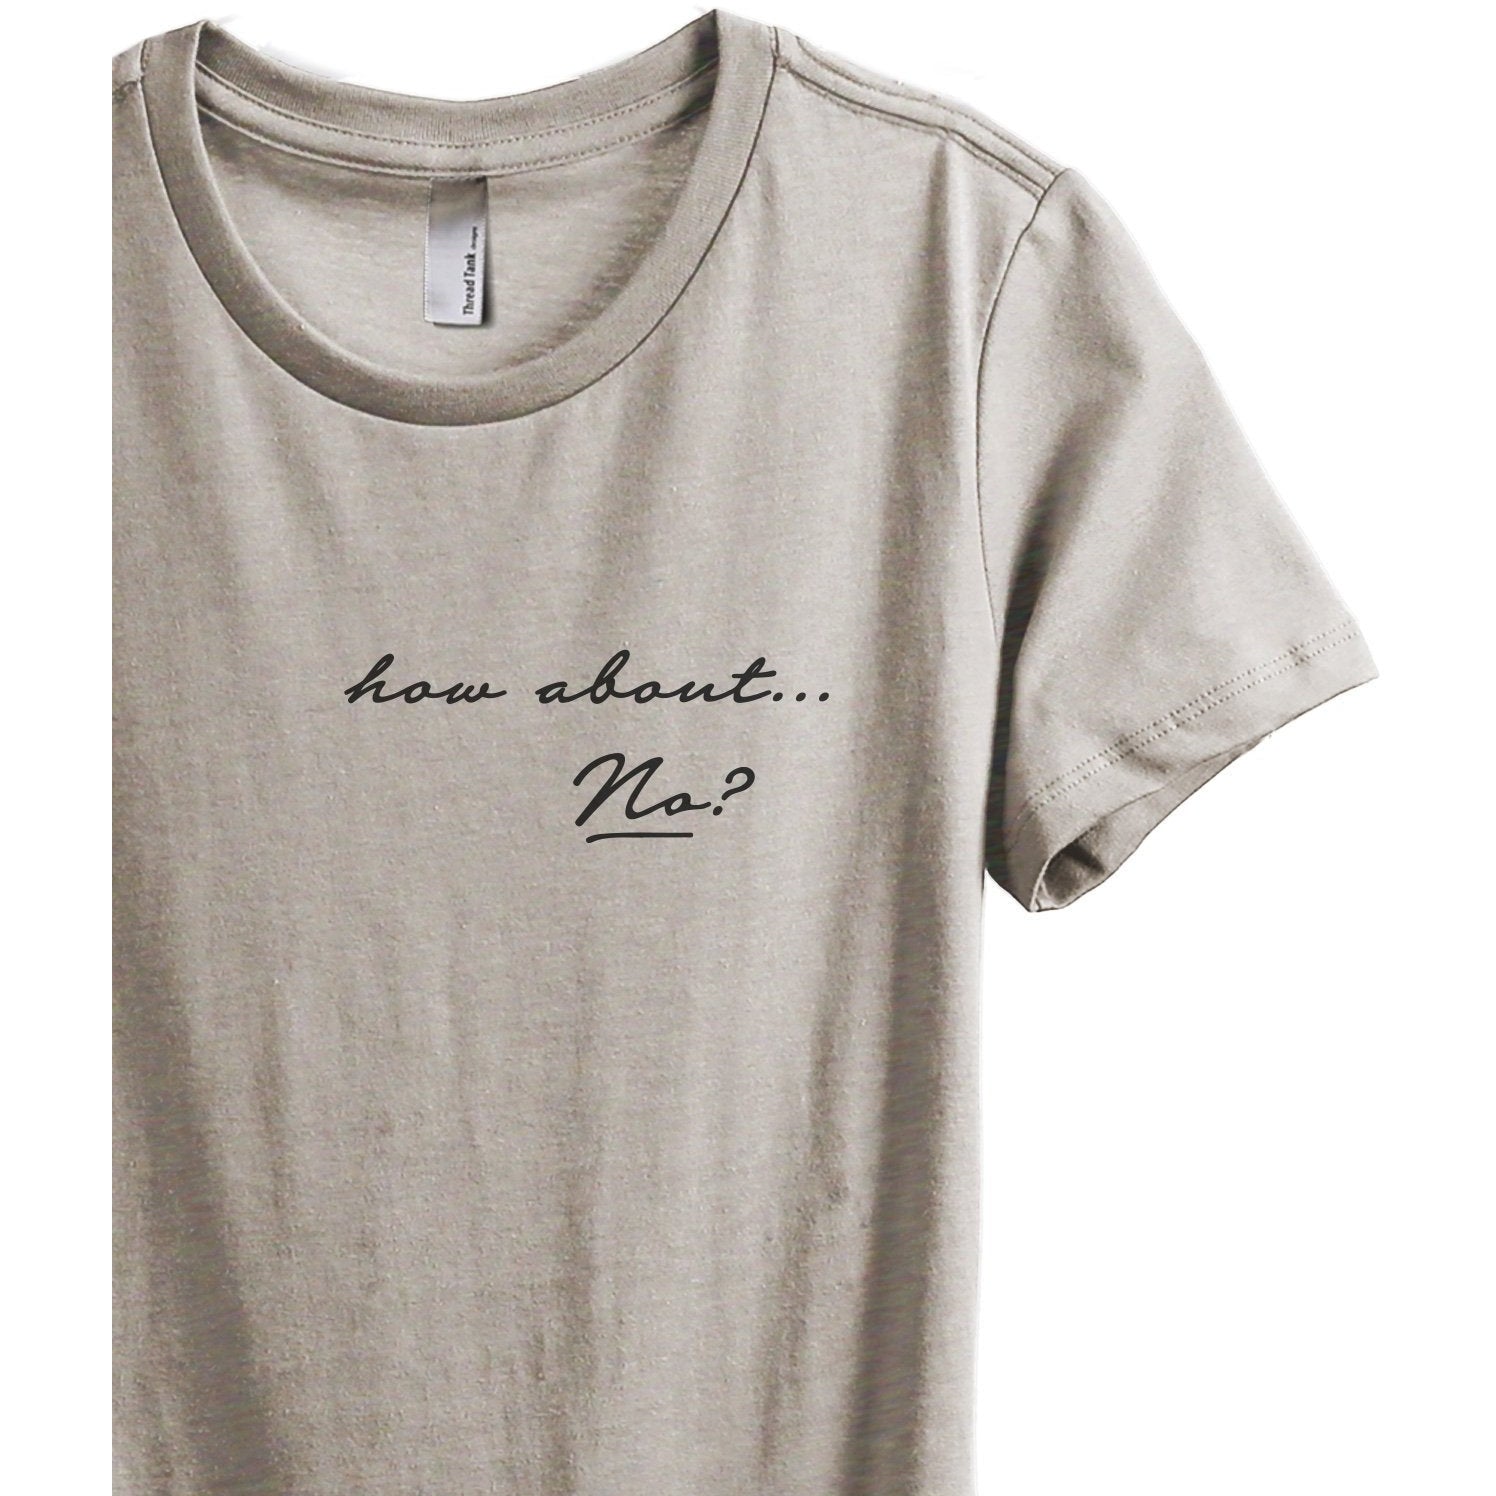 How About No Women's Relaxed Crewneck T-Shirt Top Tee Heather Tan Zoom Details